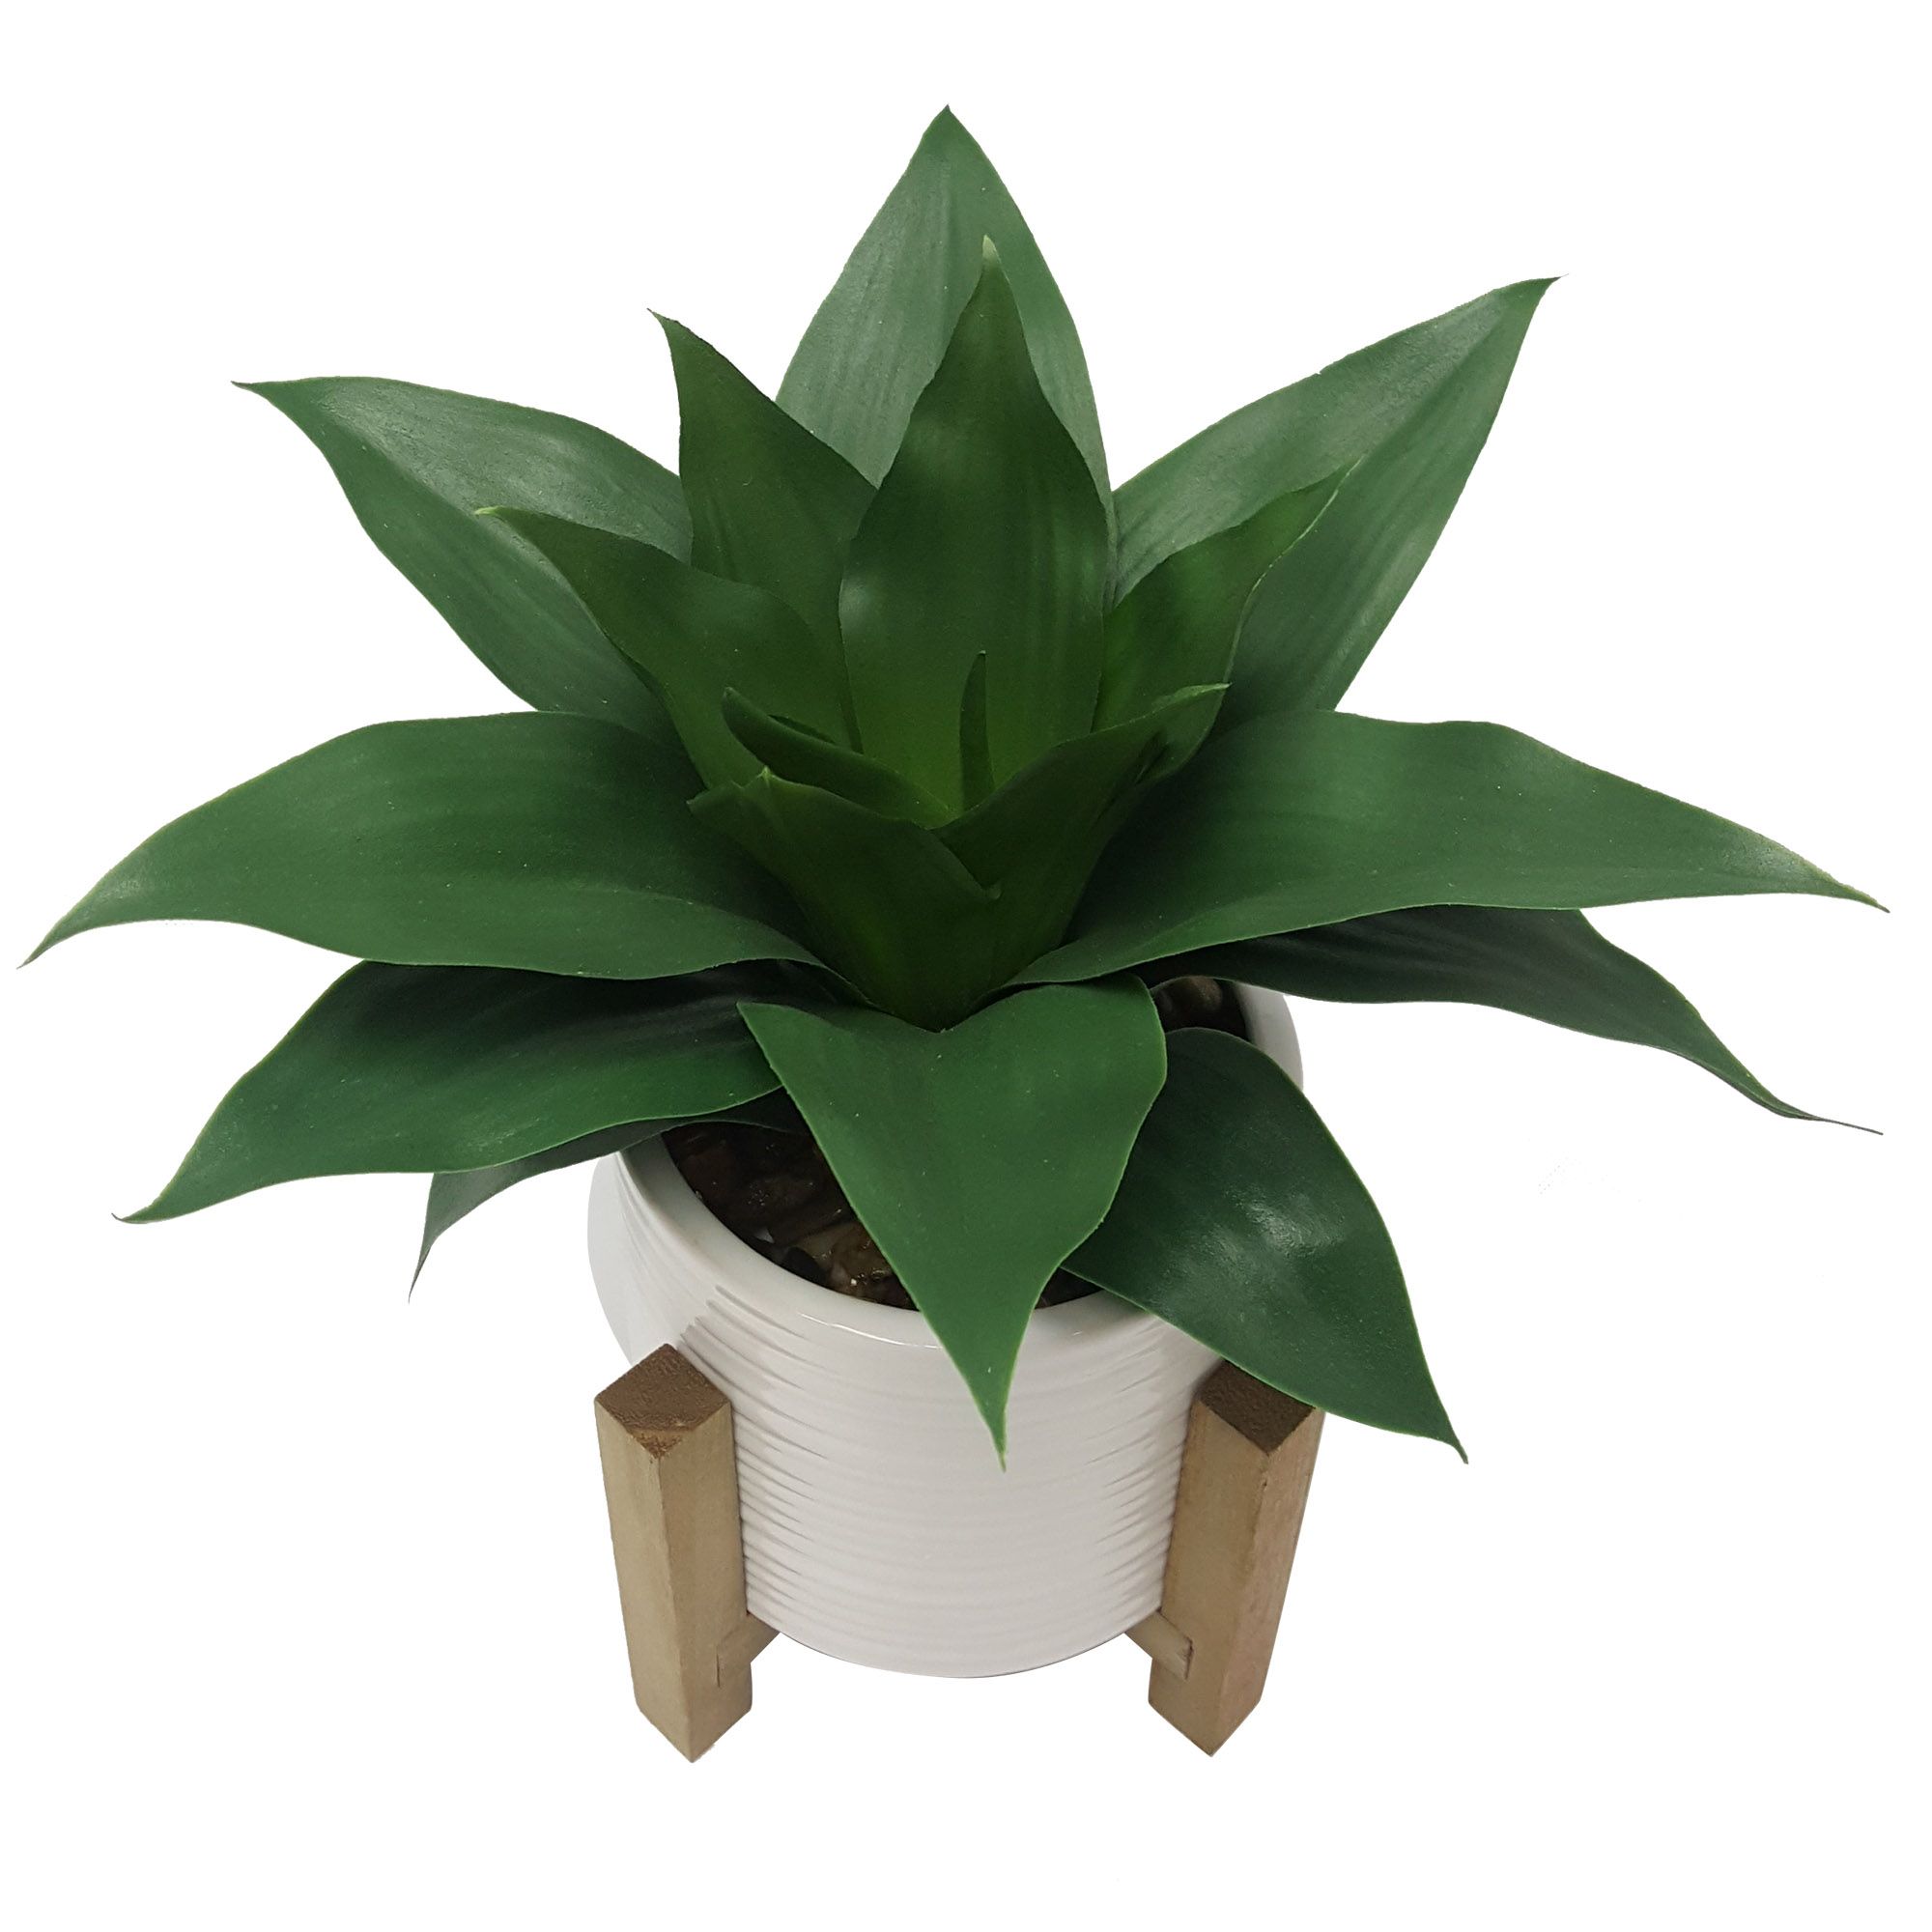 Better Homes & Gardens 10" Artificial Agave Plant in White Ceramic Pot with Wood Stand - image 4 of 7